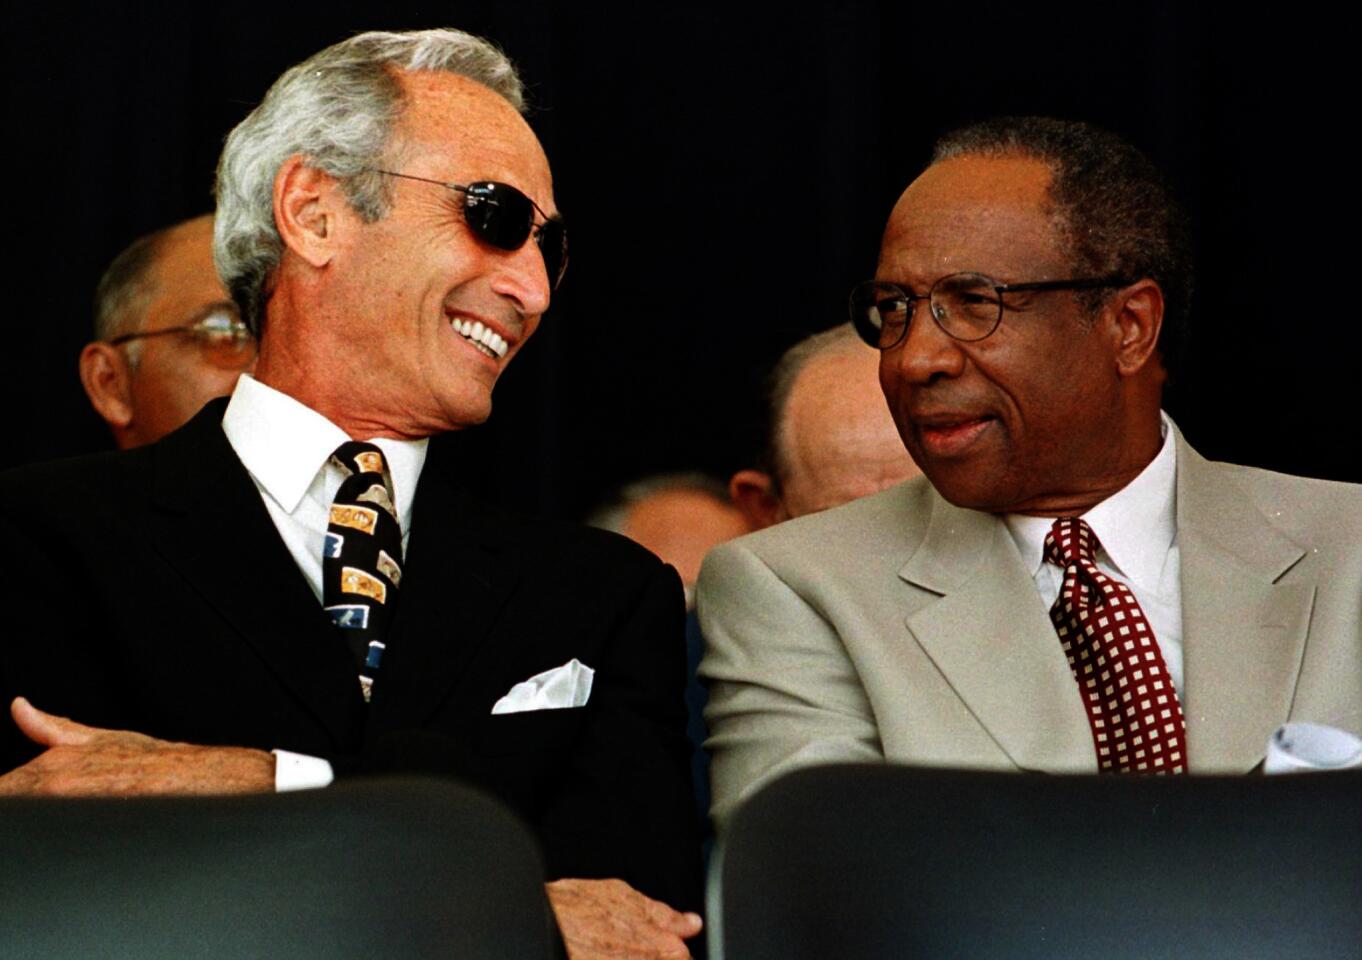 Sandy Koufax, left, a Hall of Fame Dodgers pitcher, talks with fellow Hall of Famer Frank Robinson after they took the stage before induction ceremonies in Cooperstown, N.Y., July 26, 1998.